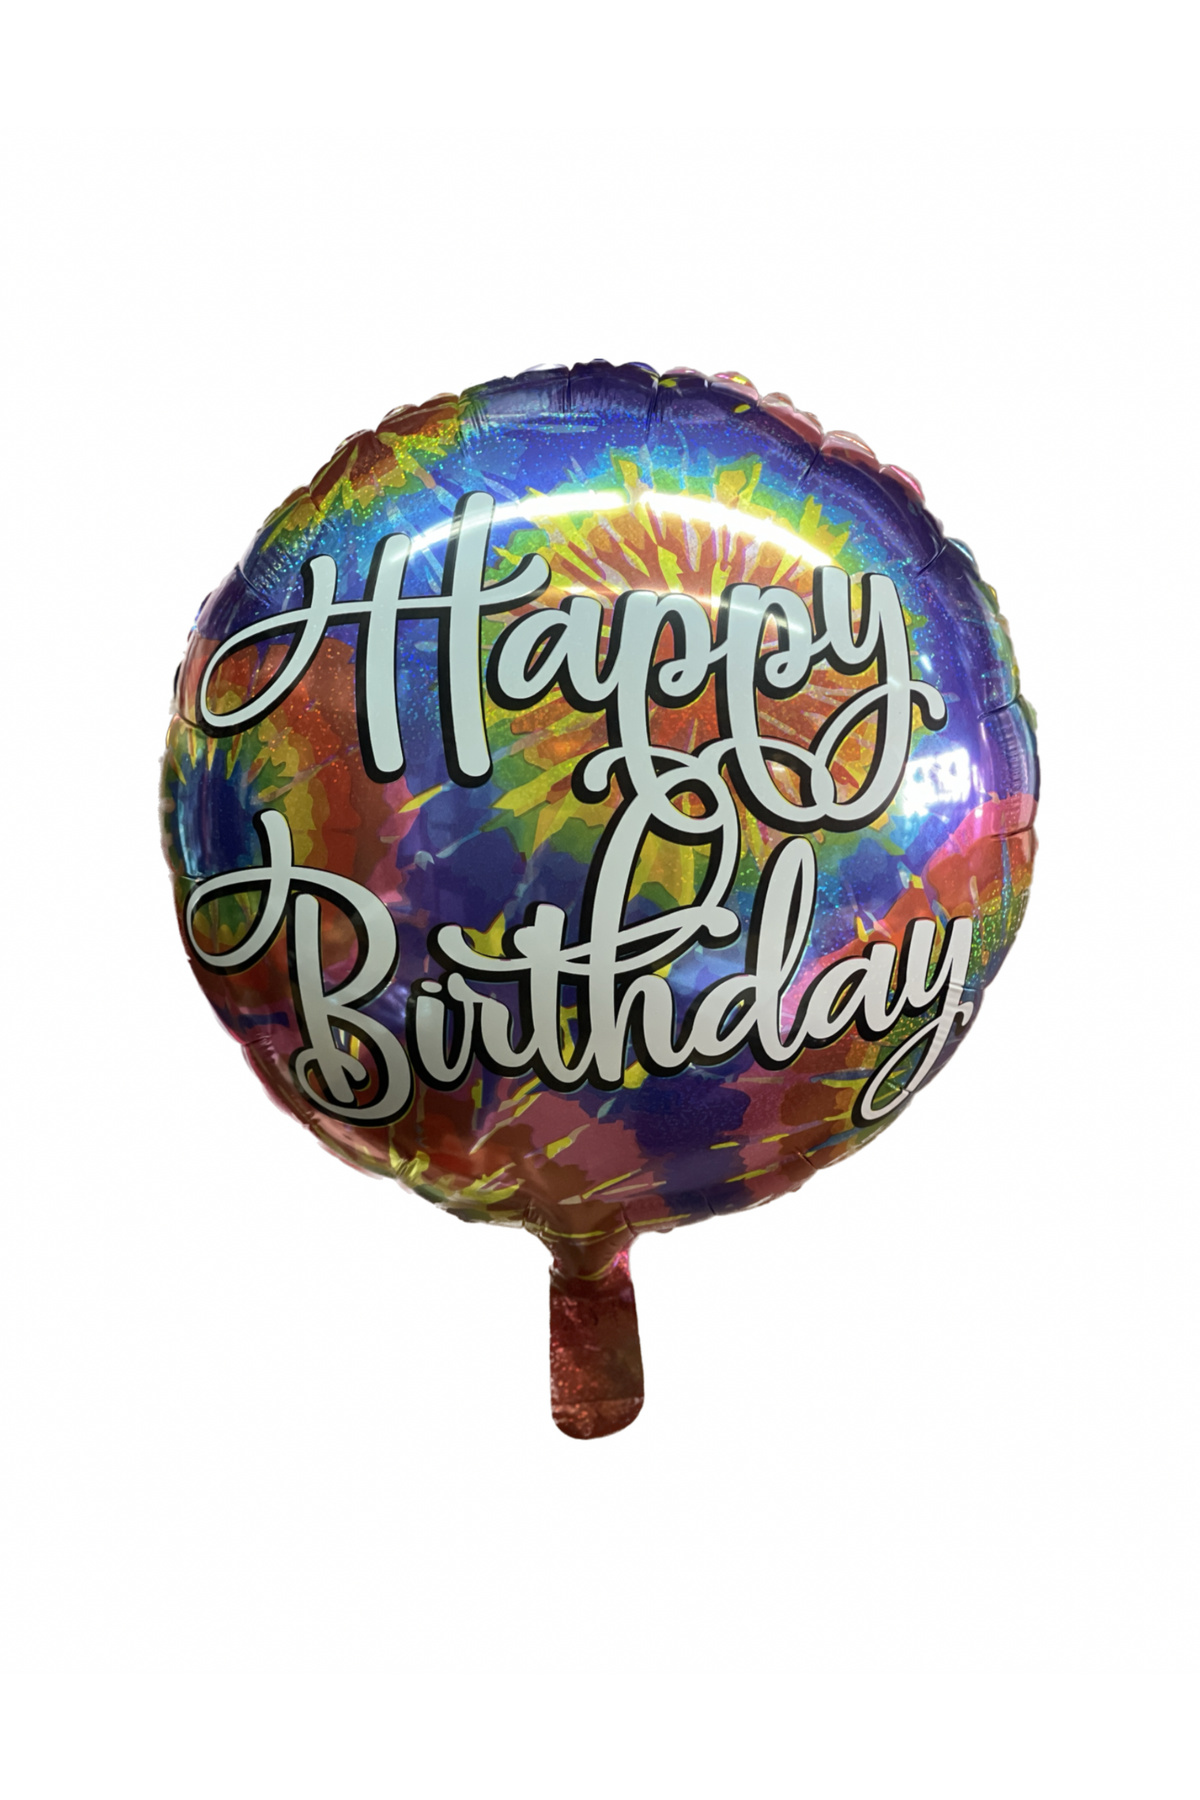 Airfilled Birthday Balloon Stick-in Add-On in Croton On Hudson, NY